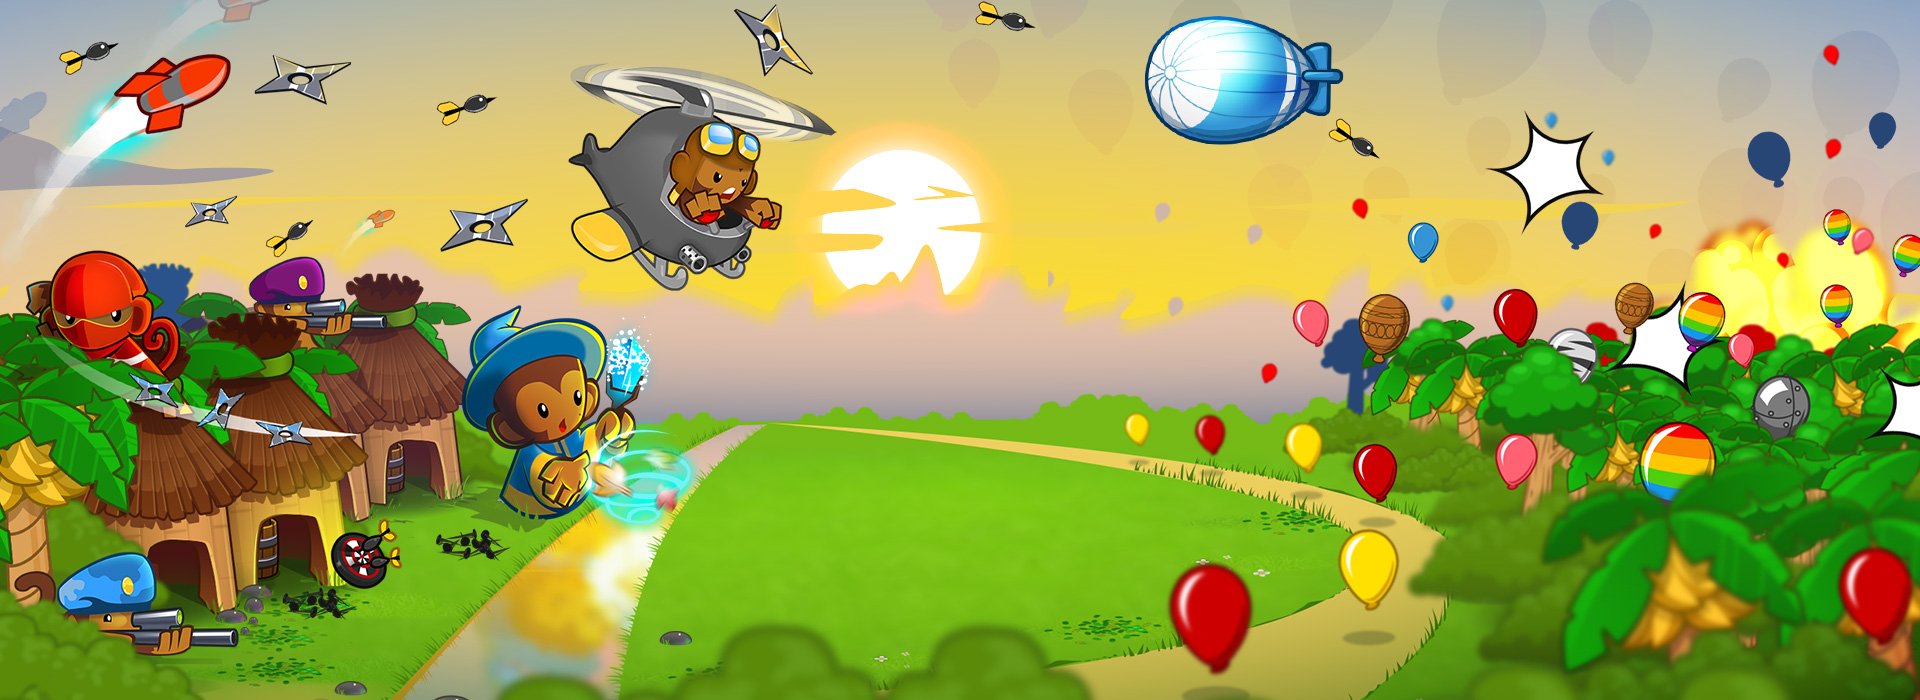 Bloons Tower Defense 5 Mobile